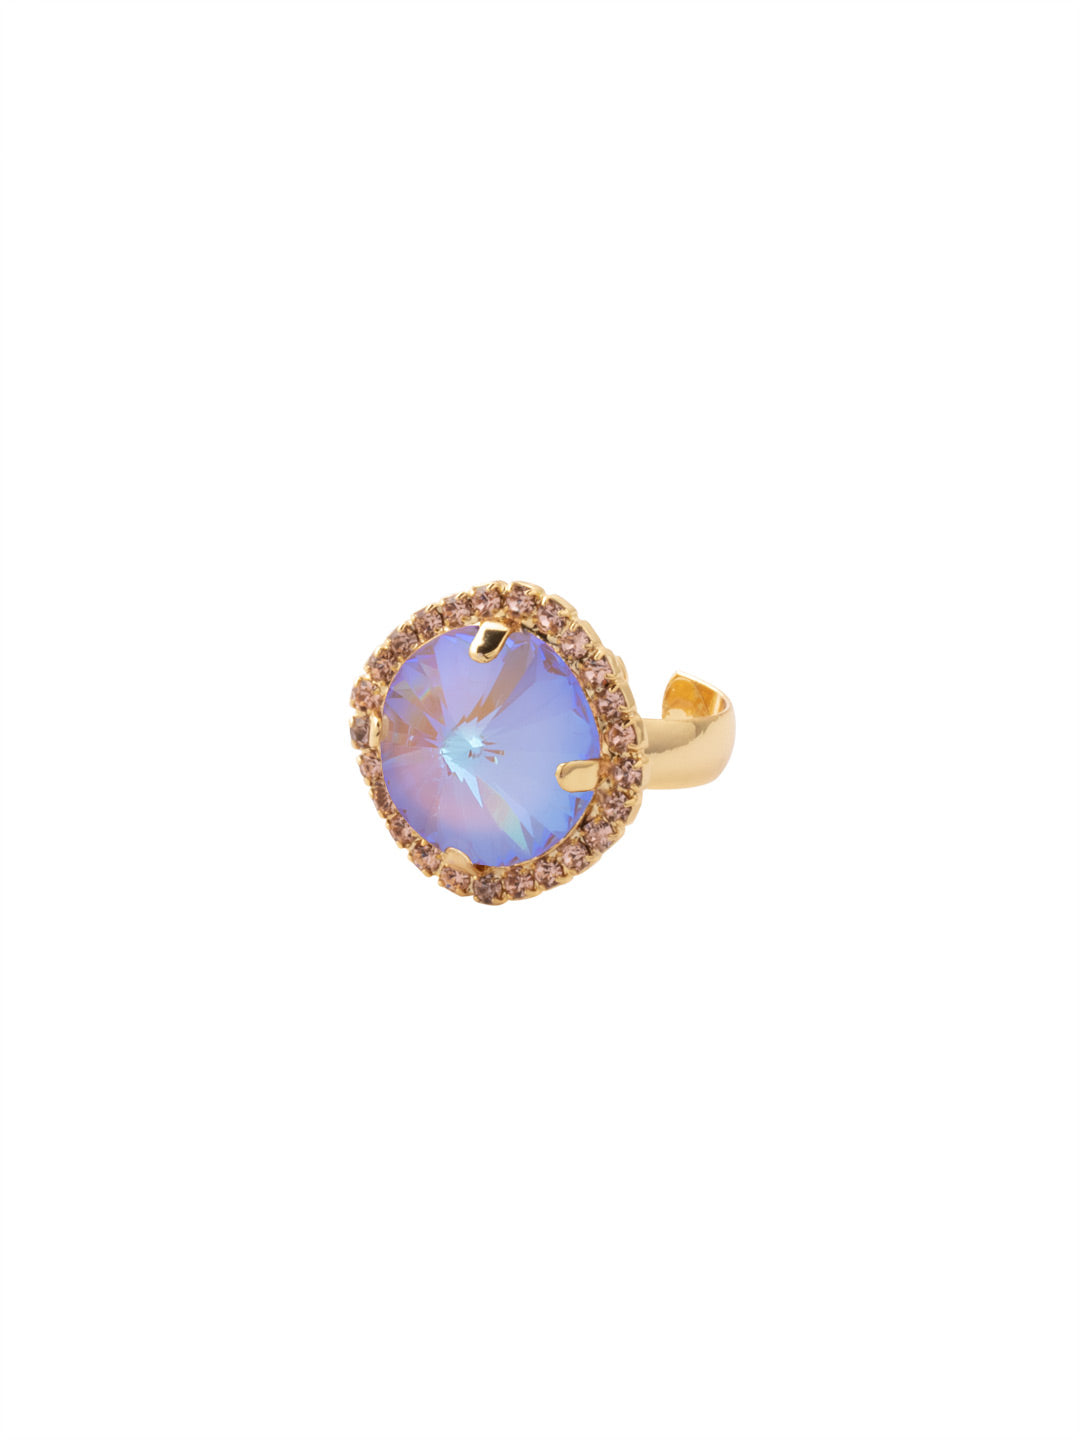 Giselle Round Cocktail Ring - RFC82BGRSU - <p>The Giselle Round Cocktail Ring features a round halo cut crystal on an adjustable band. From Sorrelli's Raw Sugar collection in our Bright Gold-tone finish.</p>